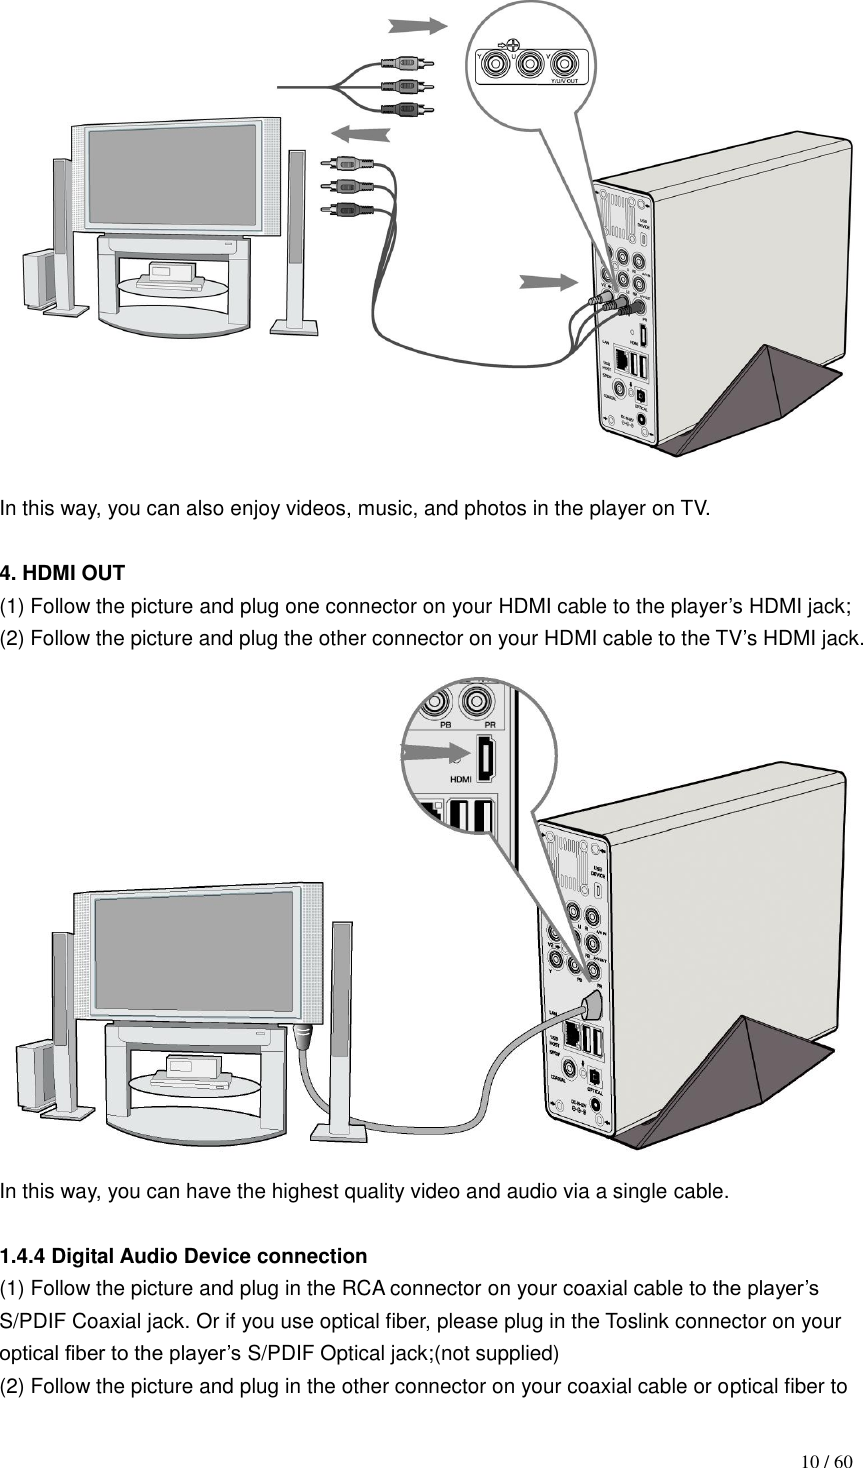                                           10 / 60  In this way, you can also enjoy videos, music, and photos in the player on TV.  4. HDMI OUT (1) Follow the picture and plug one connector on your HDMI cable to the player‟s HDMI jack; (2) Follow the picture and plug the other connector on your HDMI cable to the TV‟s HDMI jack.    In this way, you can have the highest quality video and audio via a single cable.  1.4.4 Digital Audio Device connection (1) Follow the picture and plug in the RCA connector on your coaxial cable to the player‟s S/PDIF Coaxial jack. Or if you use optical fiber, please plug in the Toslink connector on your optical fiber to the player‟s S/PDIF Optical jack;(not supplied) (2) Follow the picture and plug in the other connector on your coaxial cable or optical fiber to 